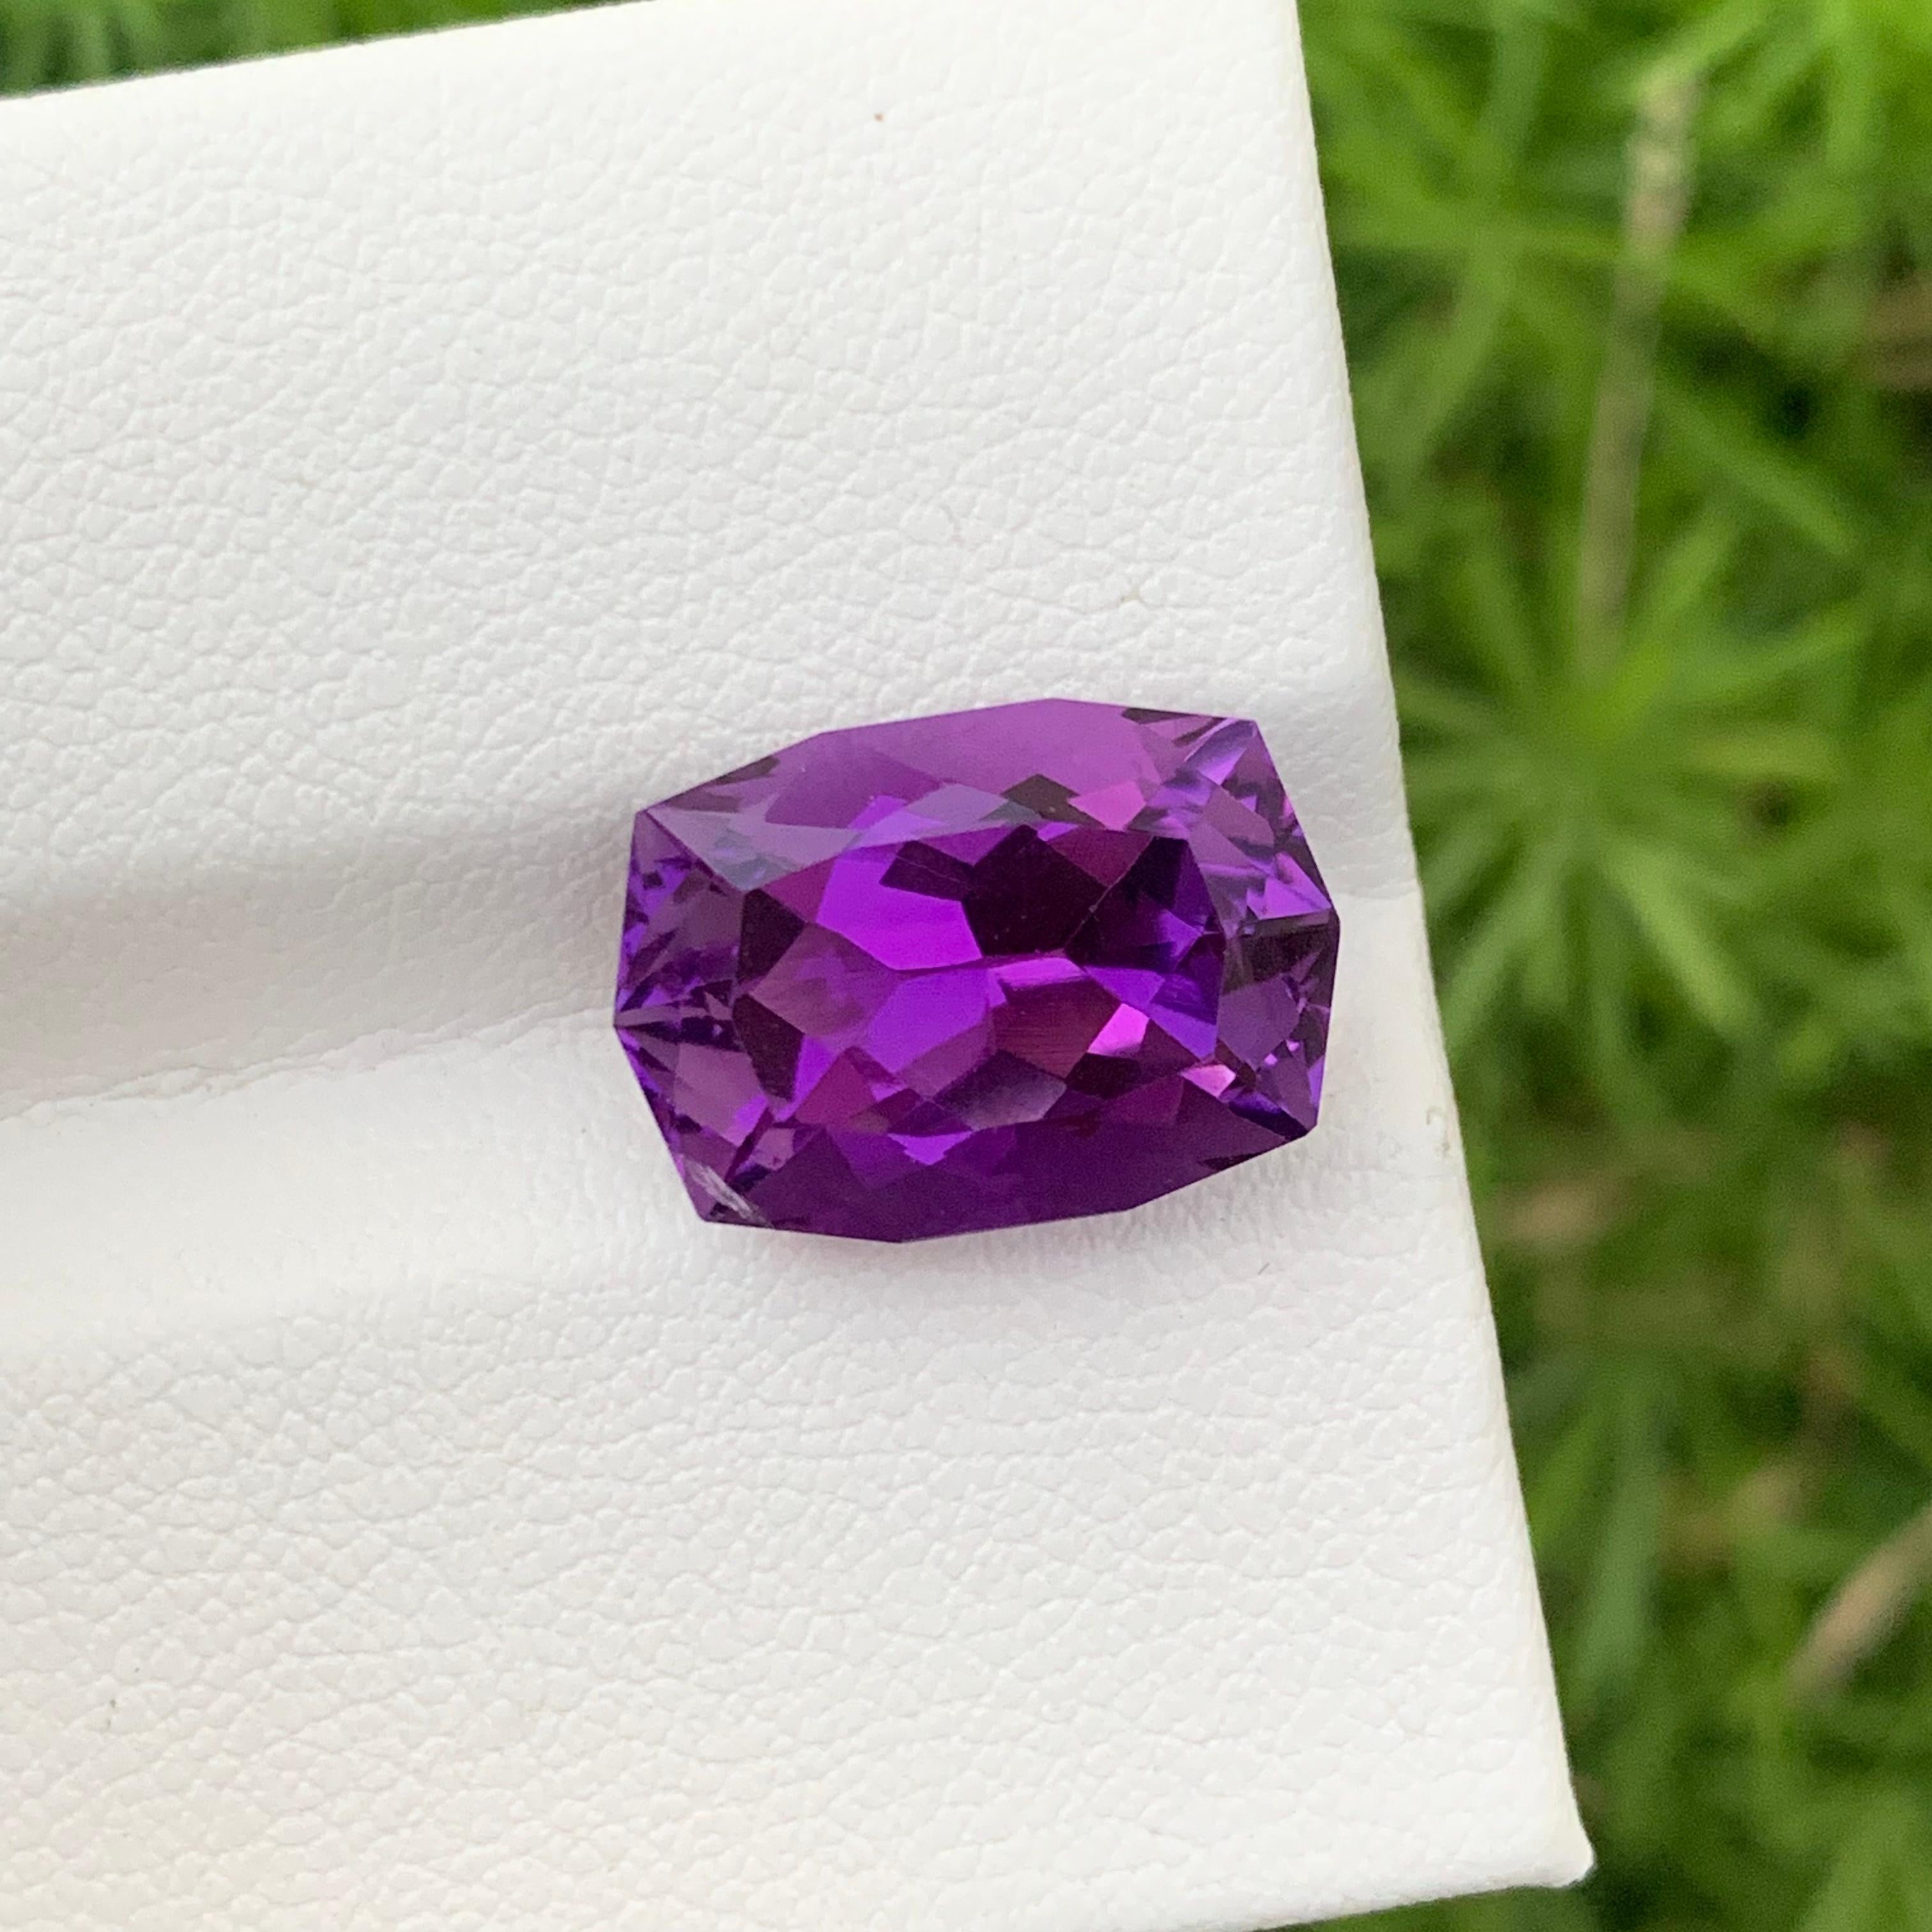 Faceted Amethyst 
Weight: 7.85 Carats 
Origin: Brazil
Shape: Long Cushion
Color: Purple
Certficate: On Customer Demand 
.
Amethyst is a captivating gemstone renowned for its striking purple hues and rich history. This violet to purple variety of